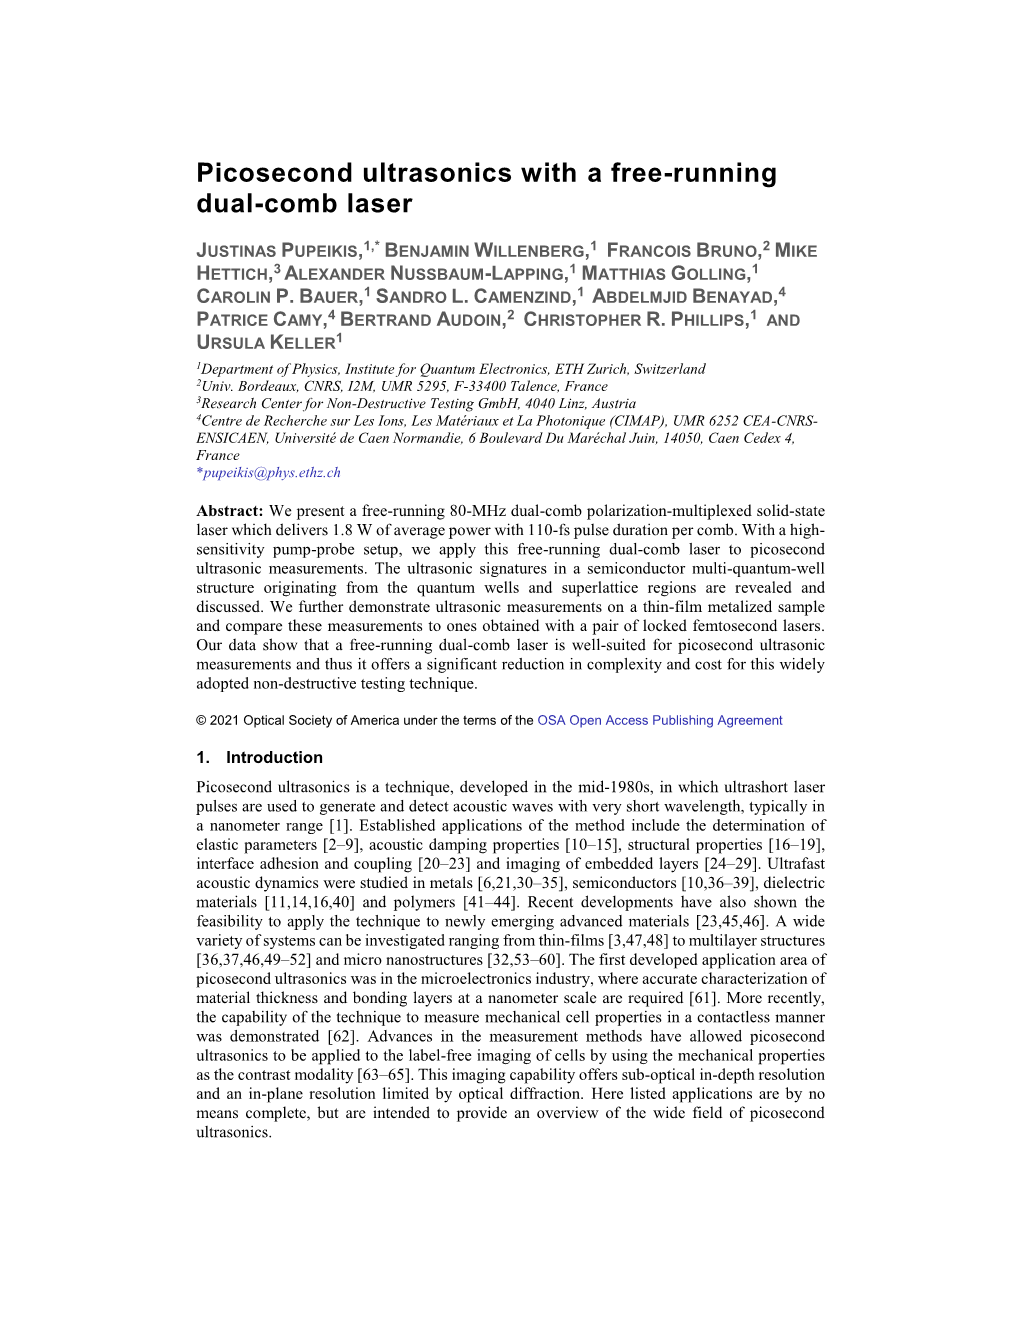 Picosecond Ultrasonics with a Free-Running Dual-Comb Laser